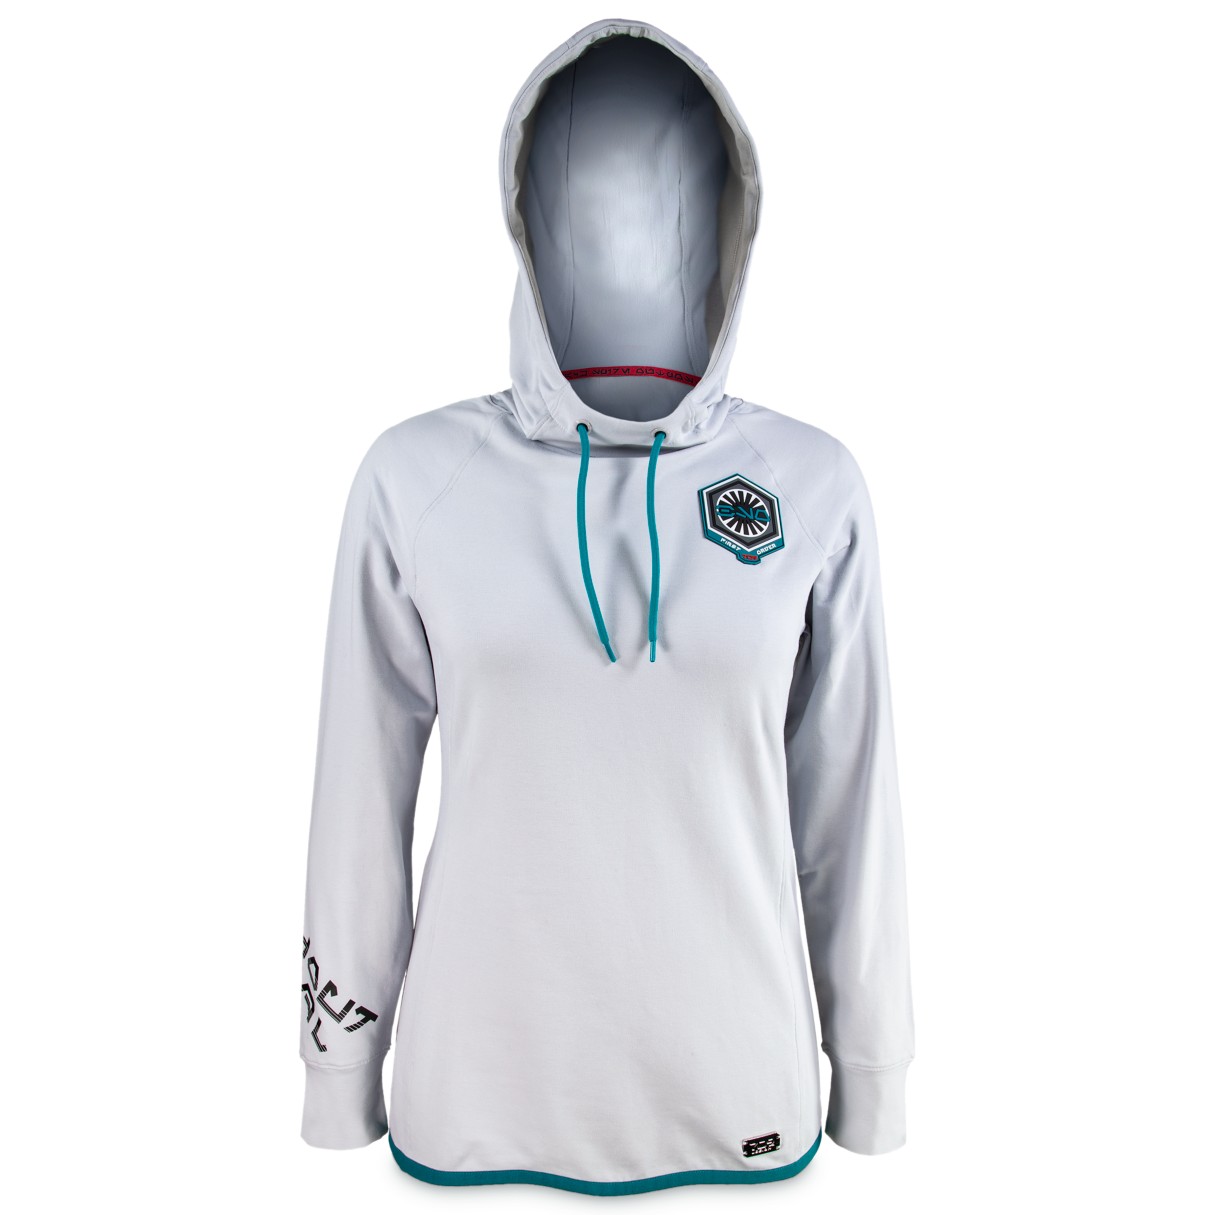 First Order 709 Hooded Pullover for Women – Star Wars: Galaxy's Edge